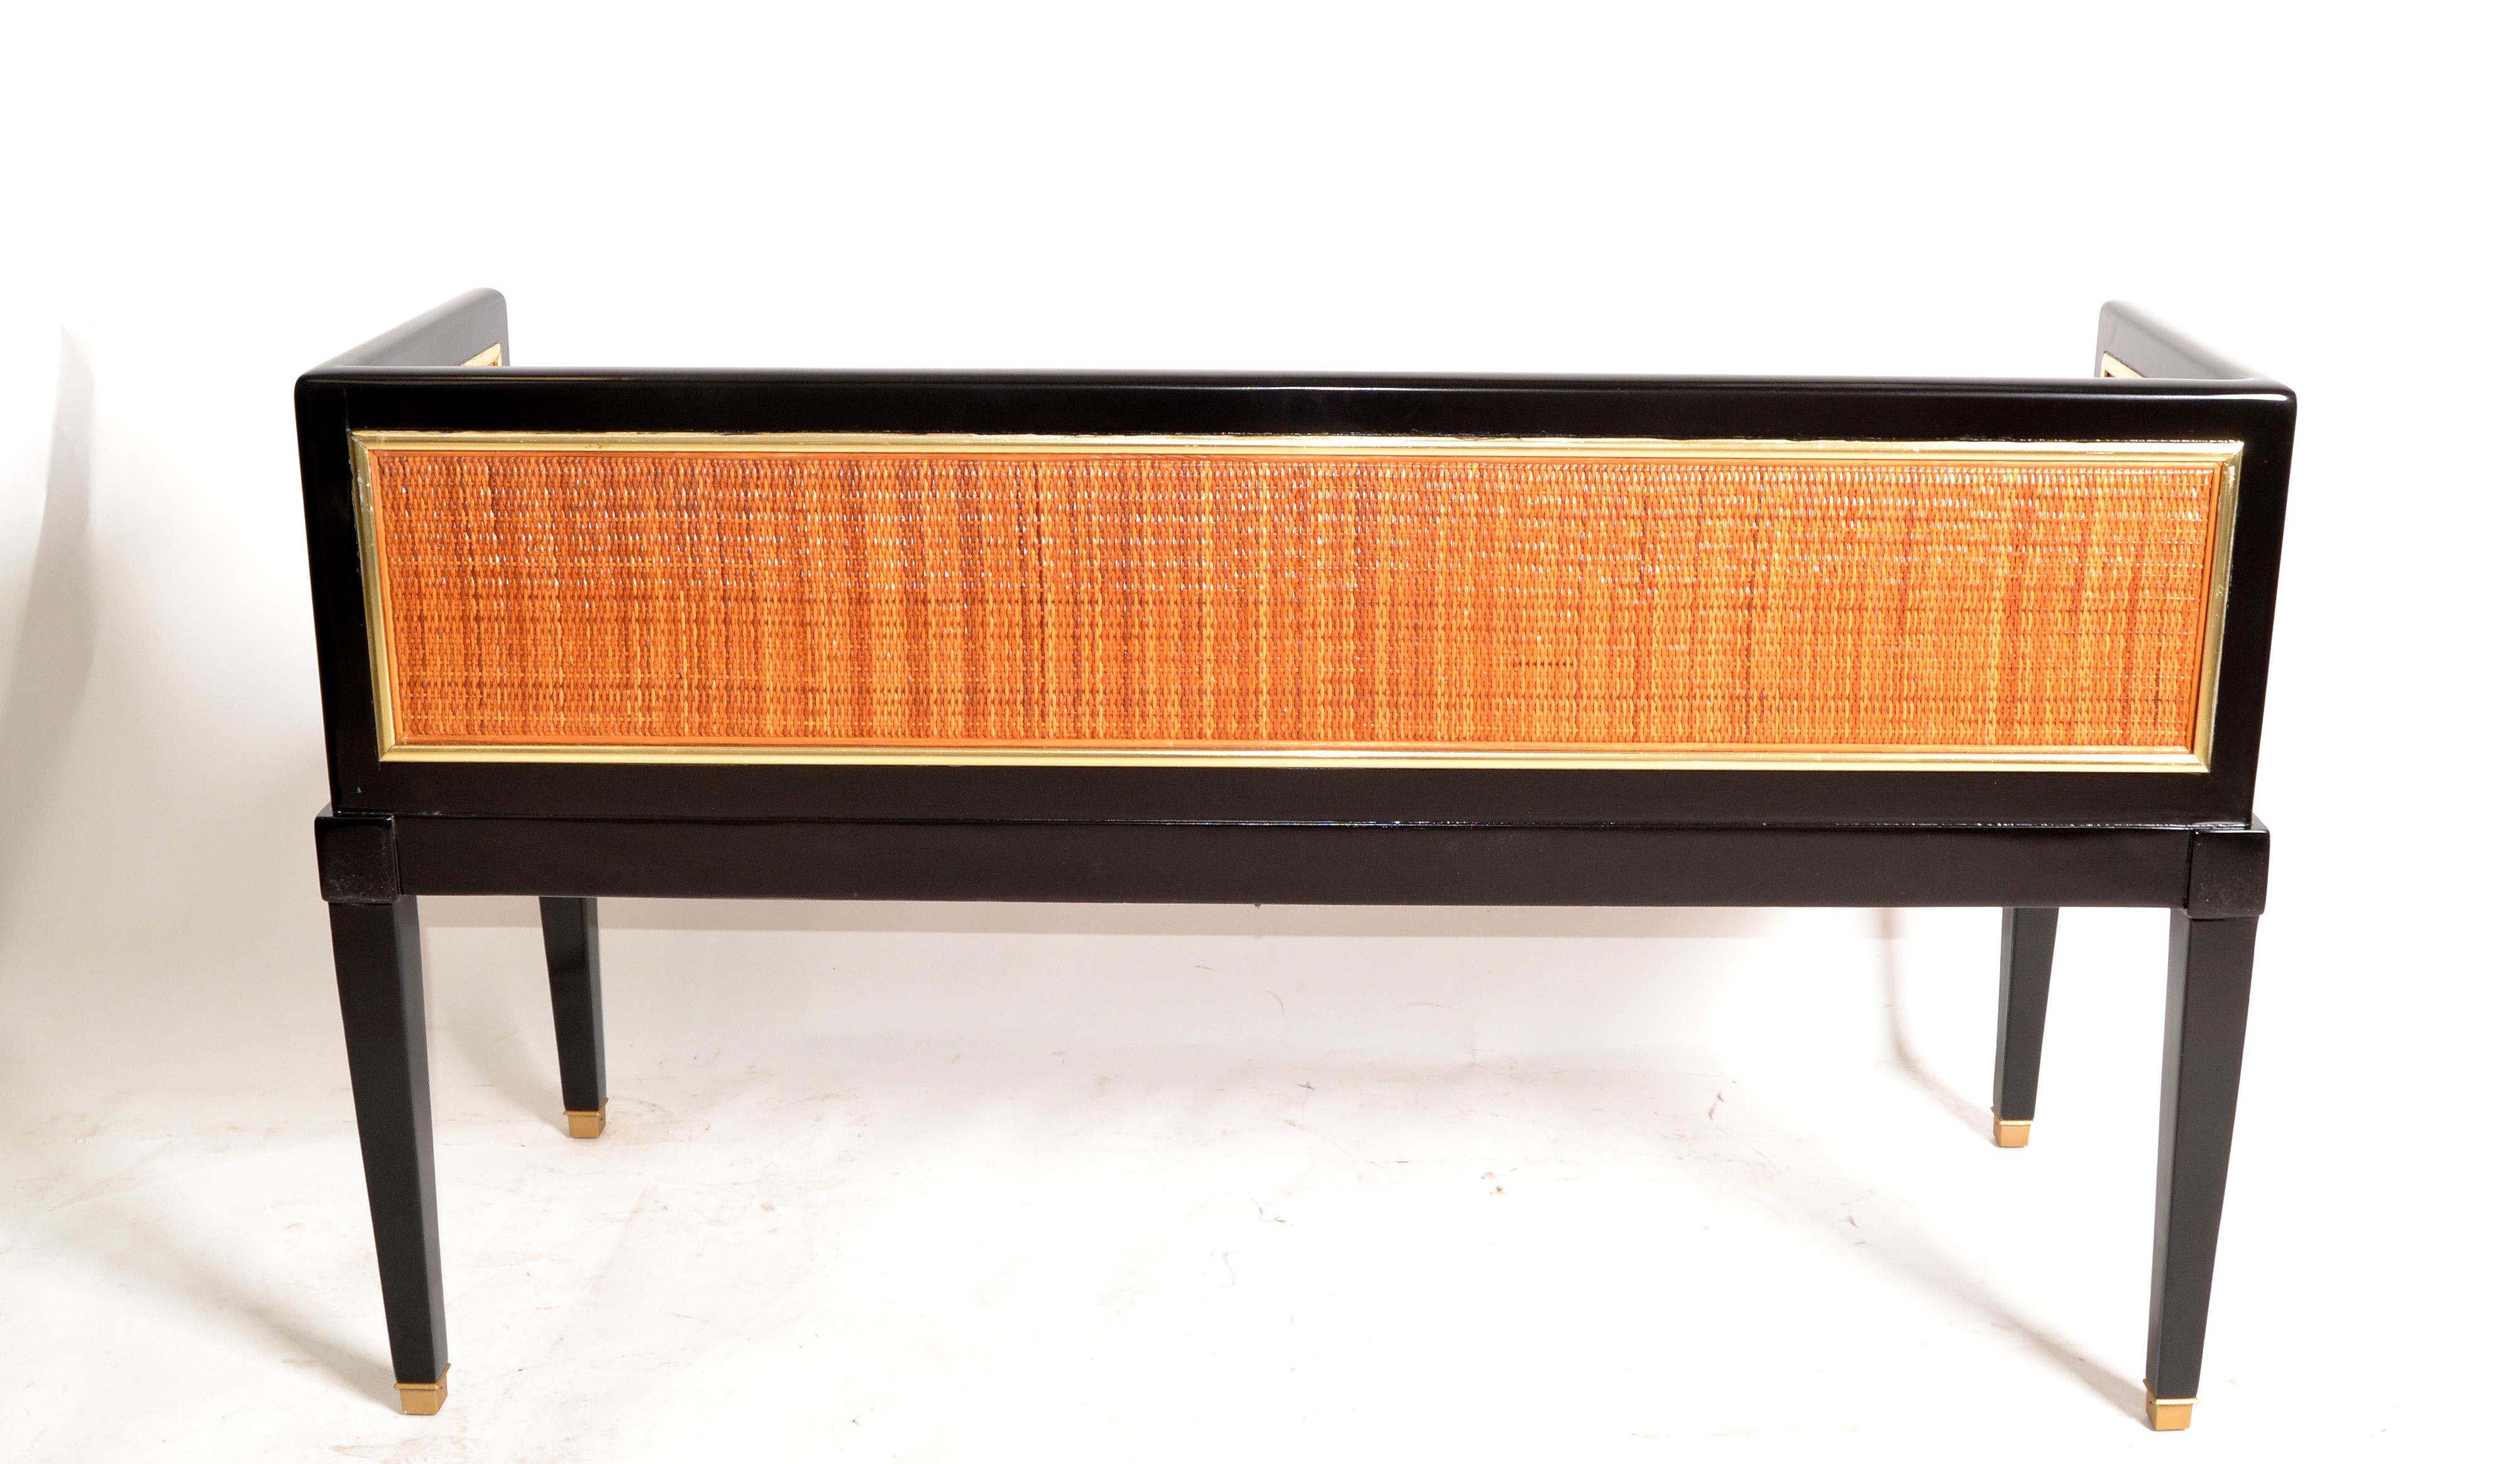 Black Lacquered Wood, Brass & Cane Seating Bench Mid-Century Modern Asian Style For Sale 5